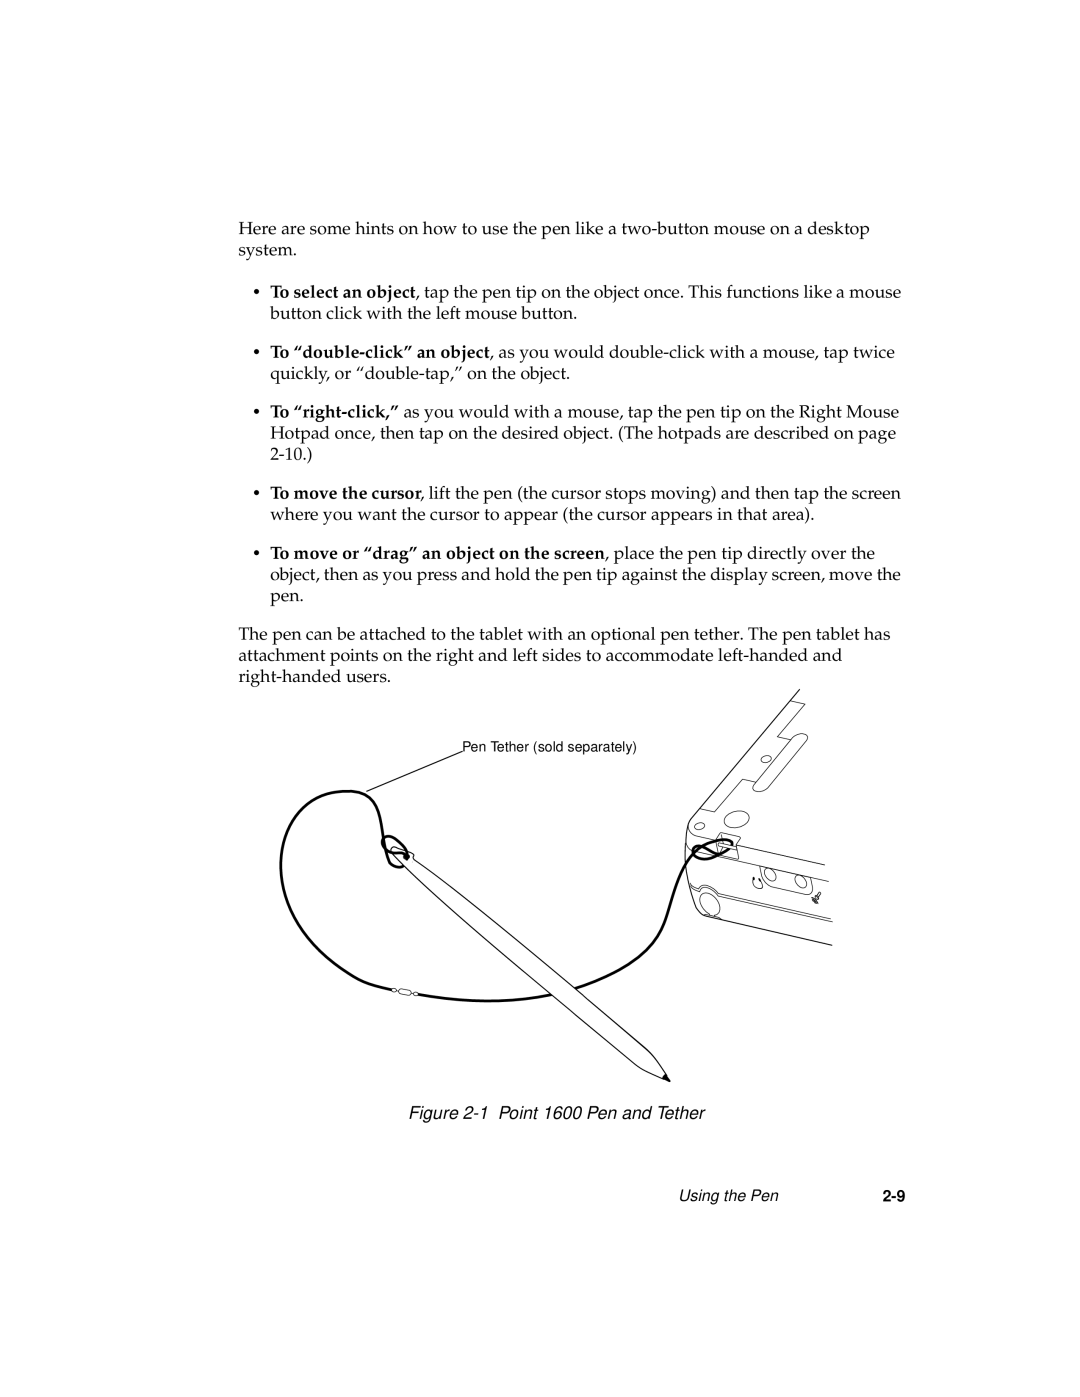 Fujitsu manual To “double-click” an object quickly, or “double-tap,” on, 1 Point 1600 Pen and Tether 